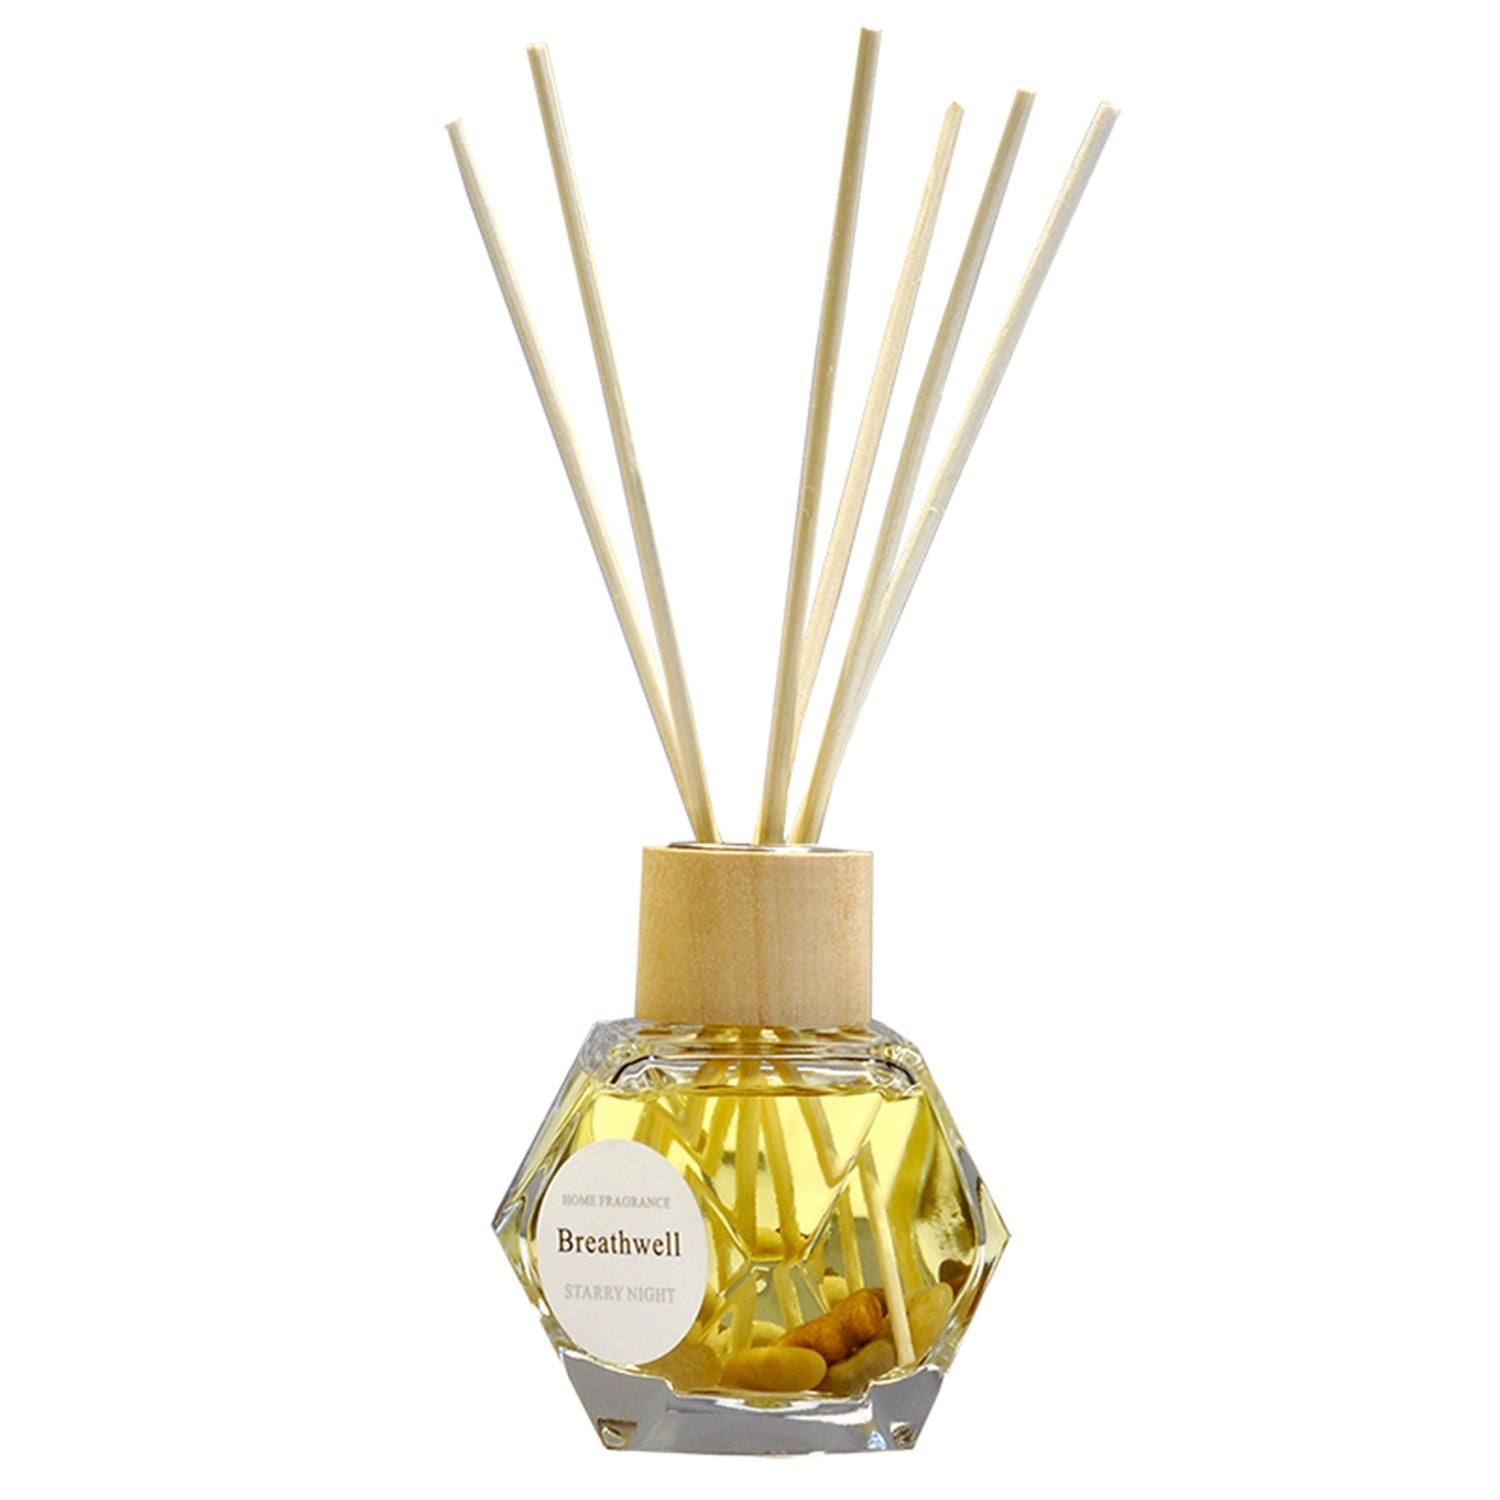 Breathwell Reed Diffuser 100ML Premium Essential Oil Aromatherapy Polygonal Bottle with Reed Stick and Cobblestone Reed Diffuser Breathwell English Pear & Freesia 